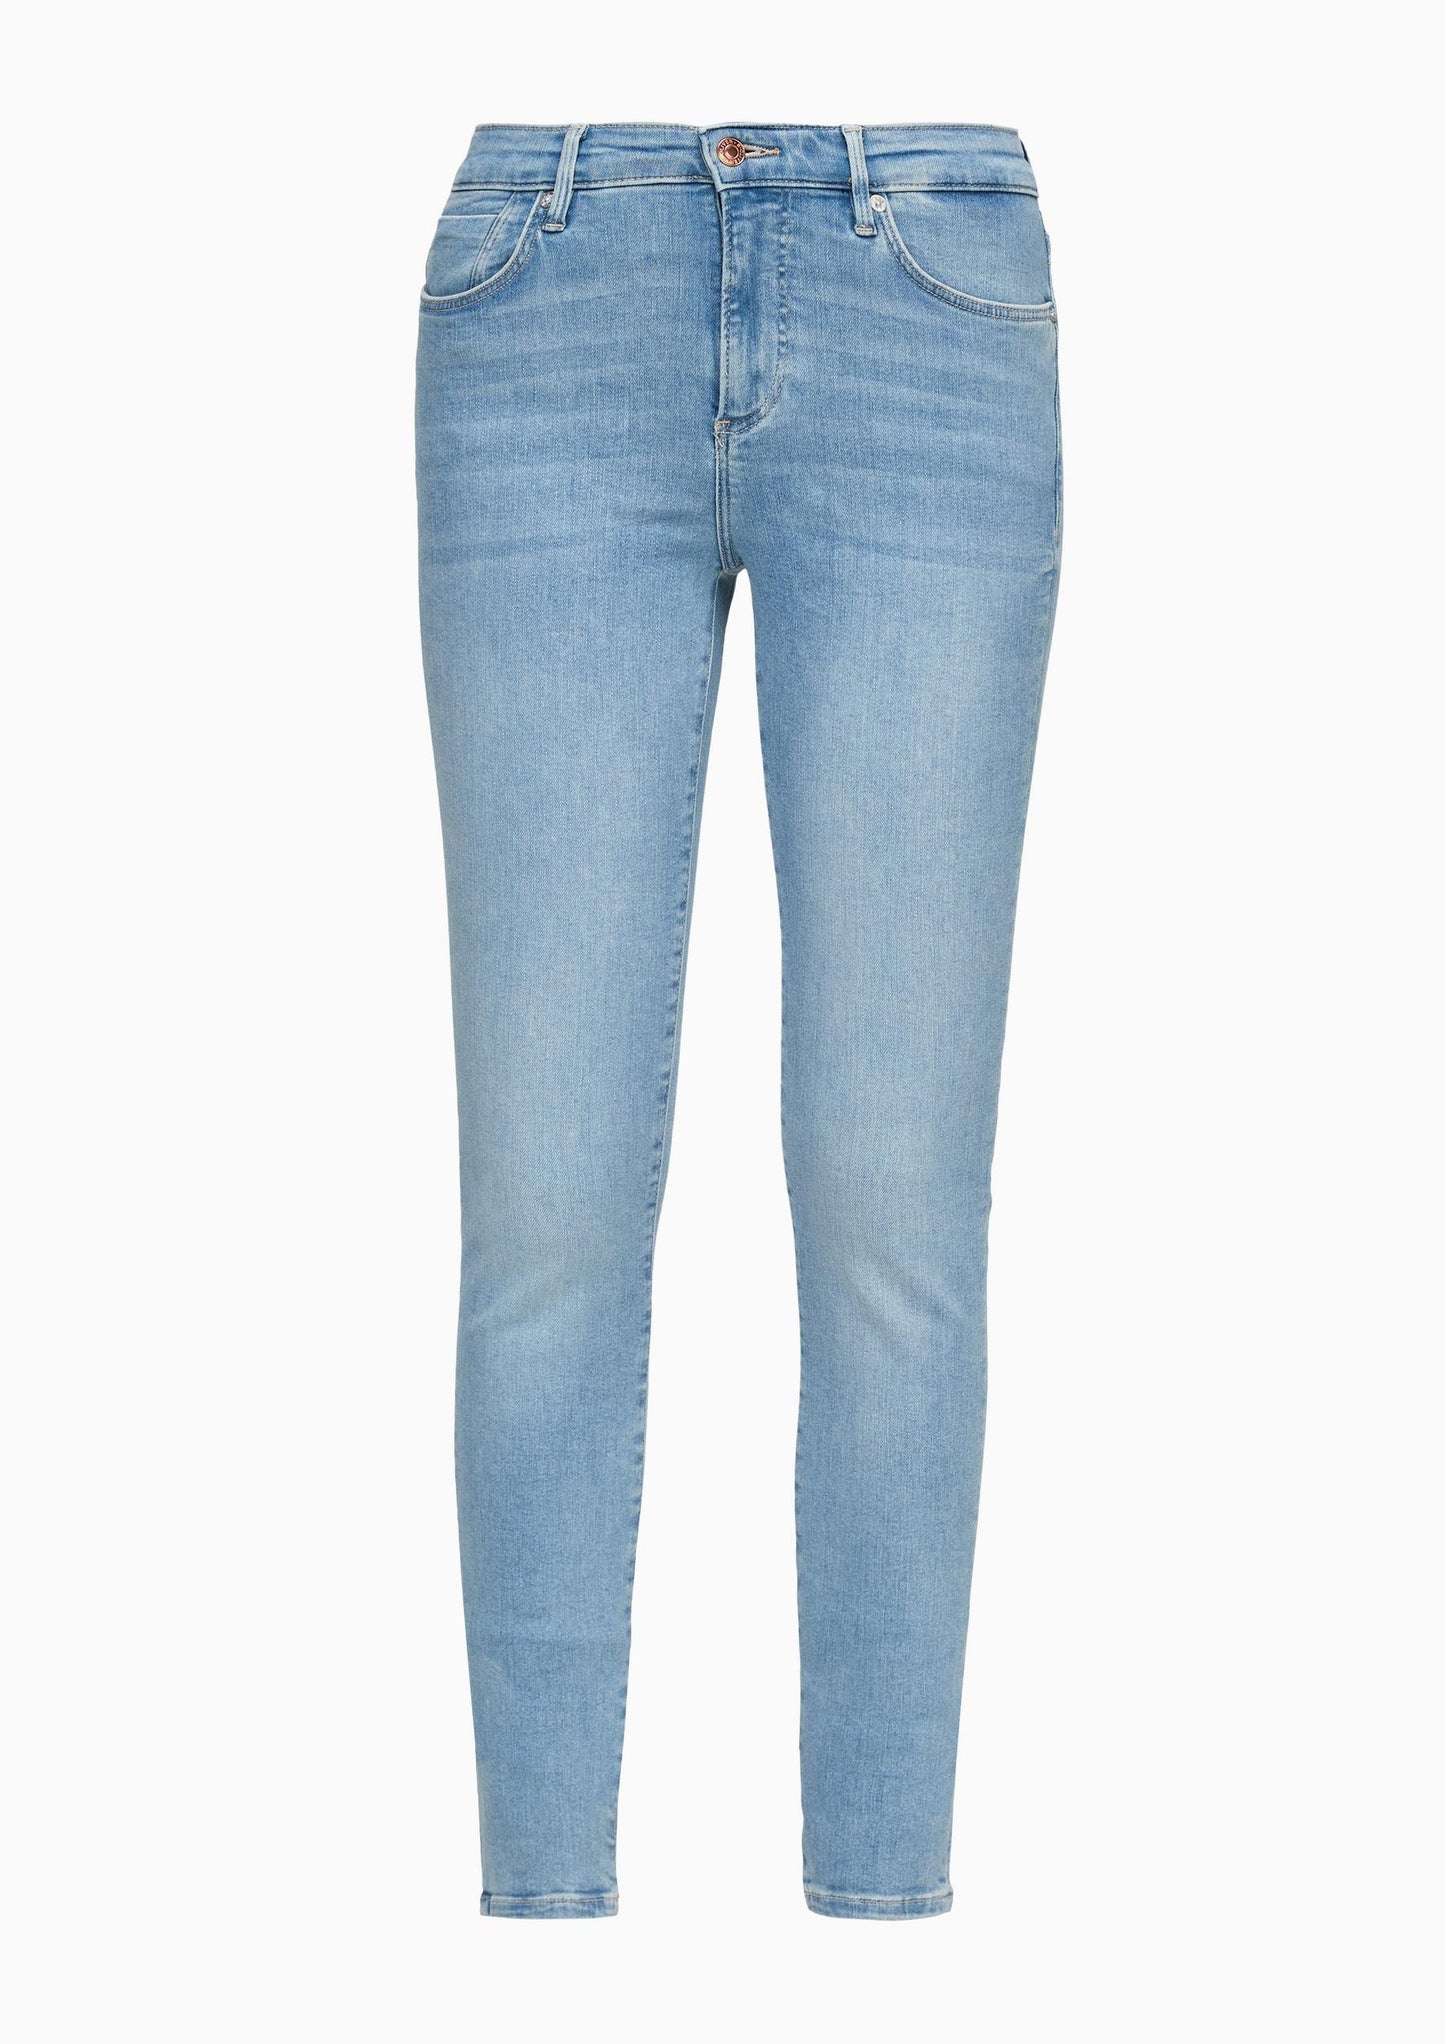 s.Oliver Jeans Hose im Style IZABELL in hellblau 2061418-53Z4